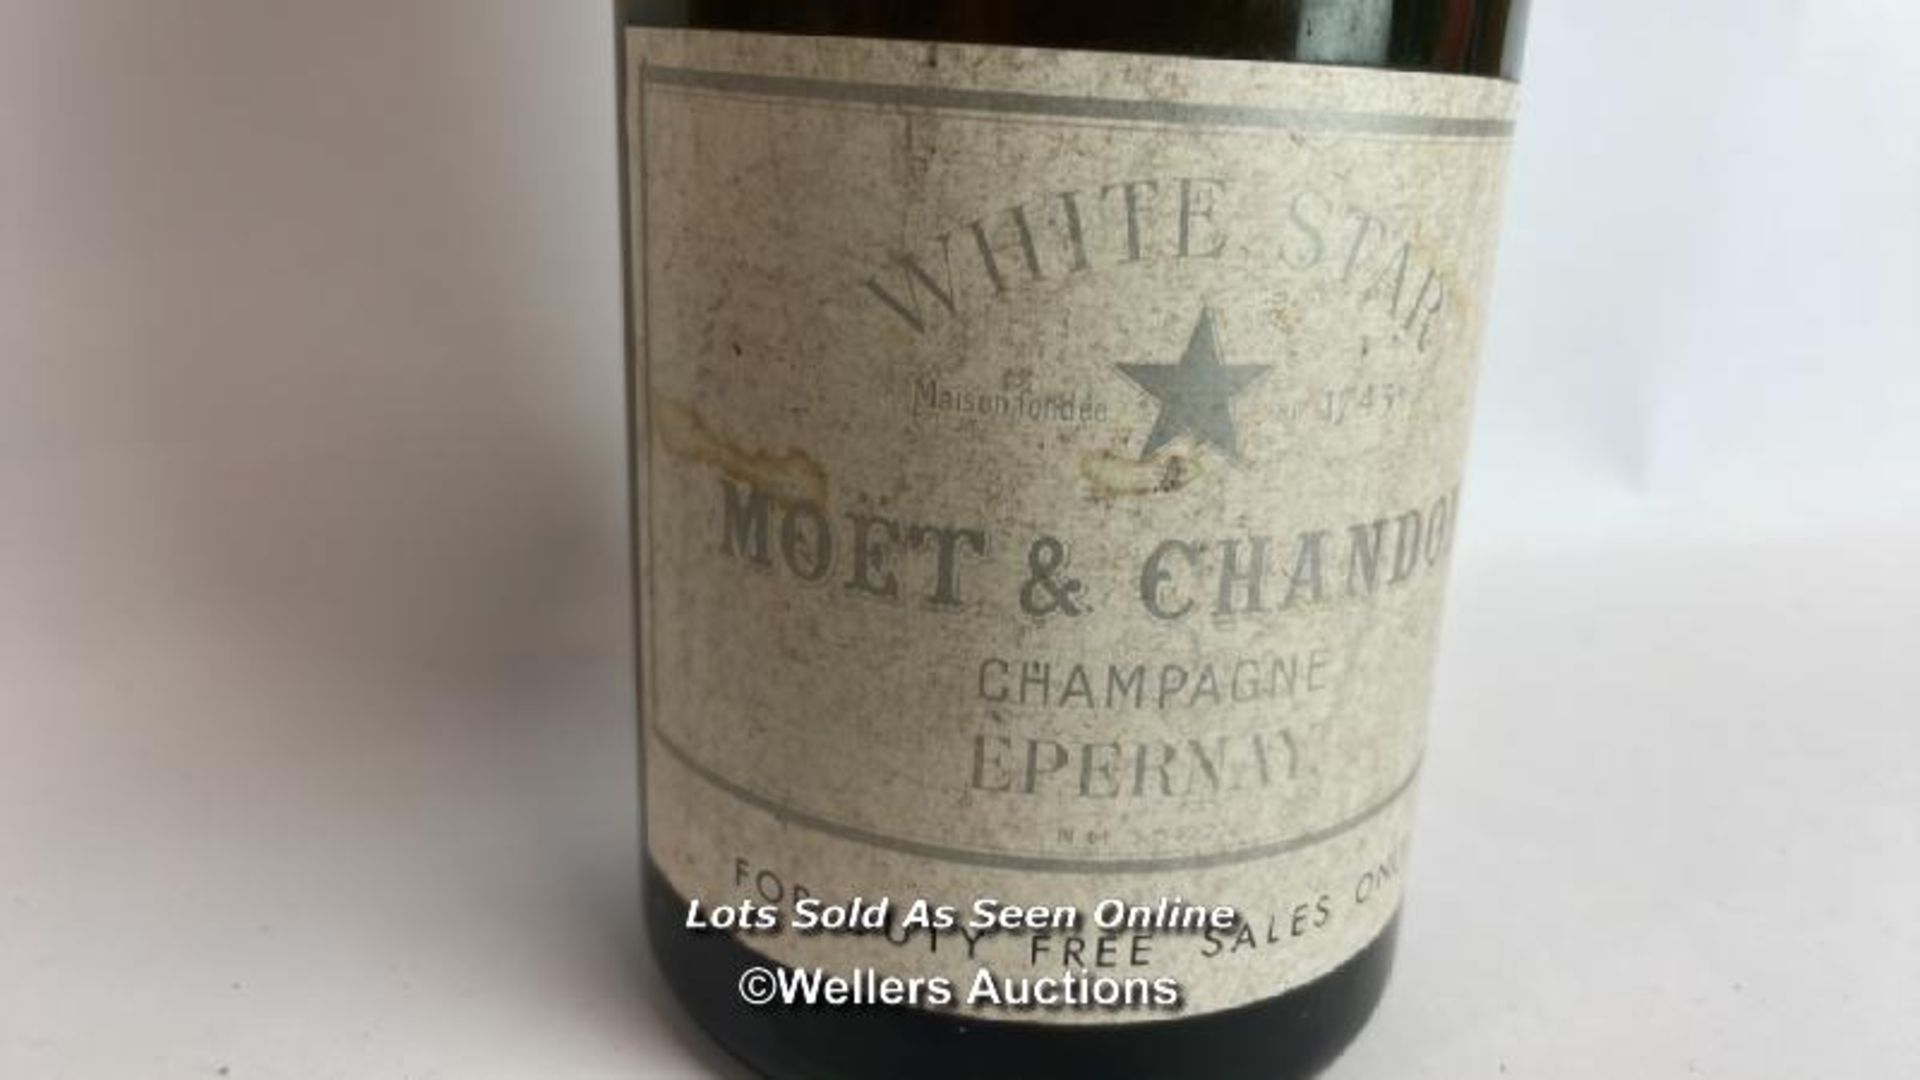 White Star Moet & Chandon Champagne Epernay, 75cl, NM3342272 / Please see images for fill level - Bild 3 aus 7